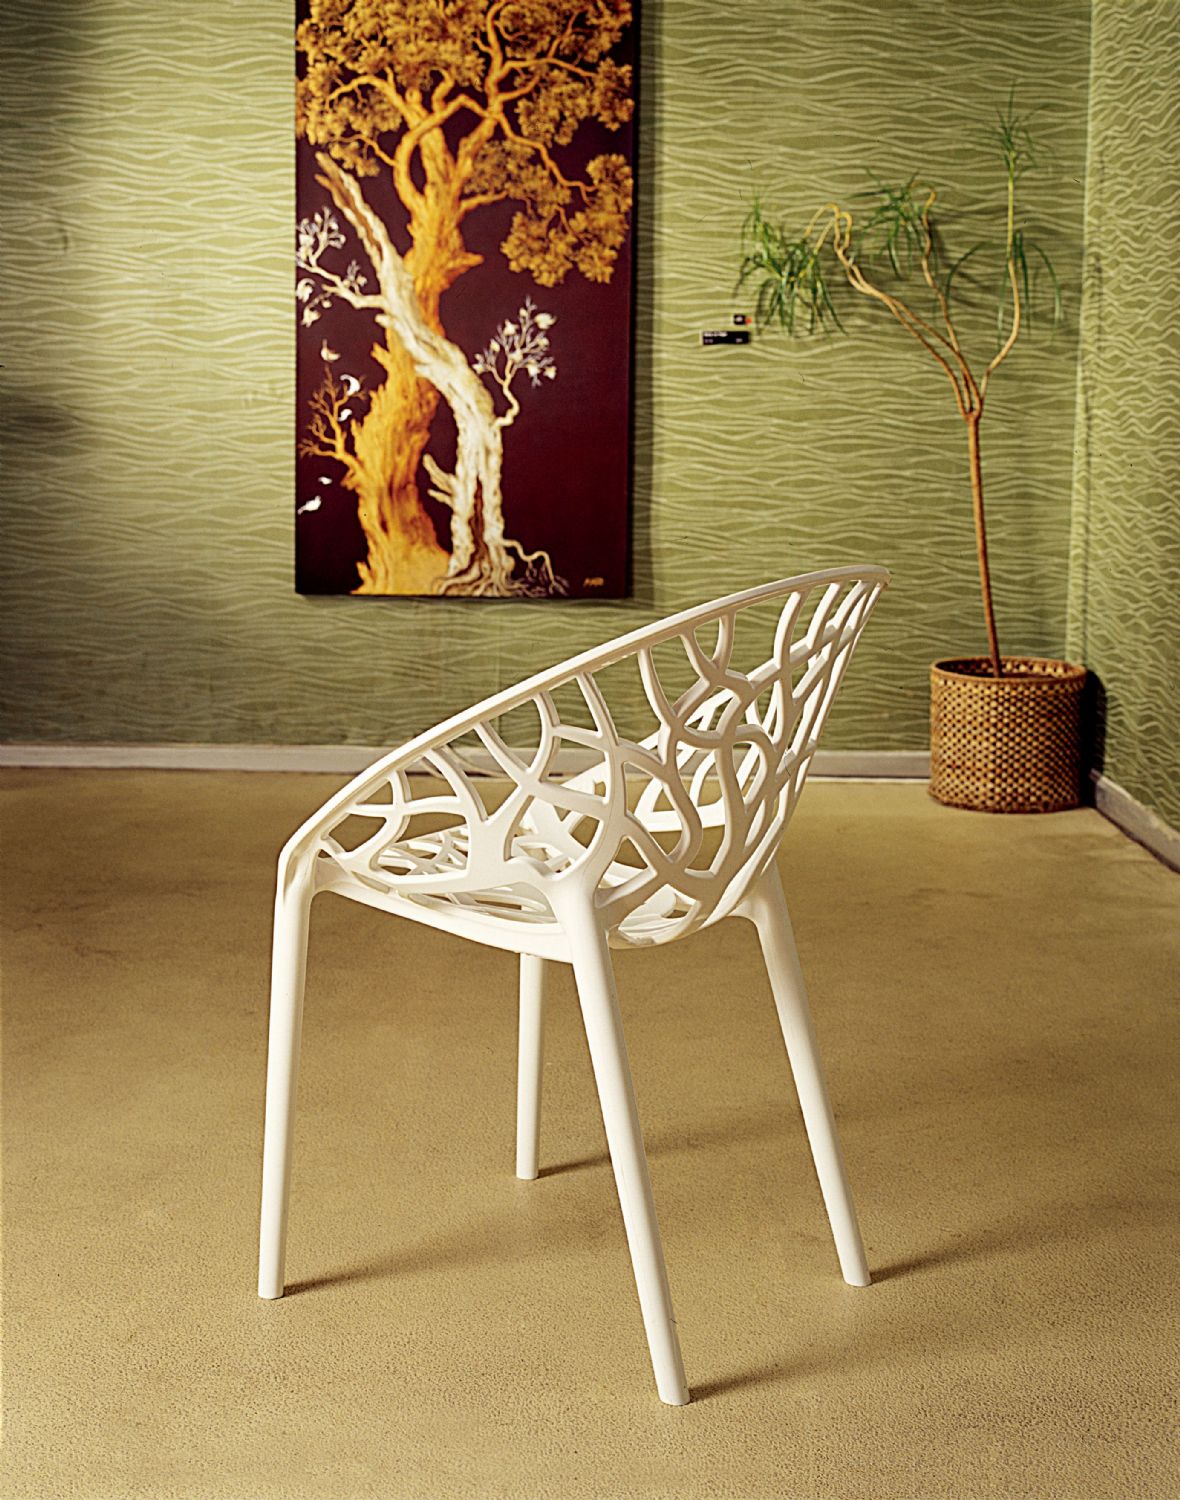 Crystal Polycarbonate Modern Dining Chair Transparent ISP052-TCL - 1